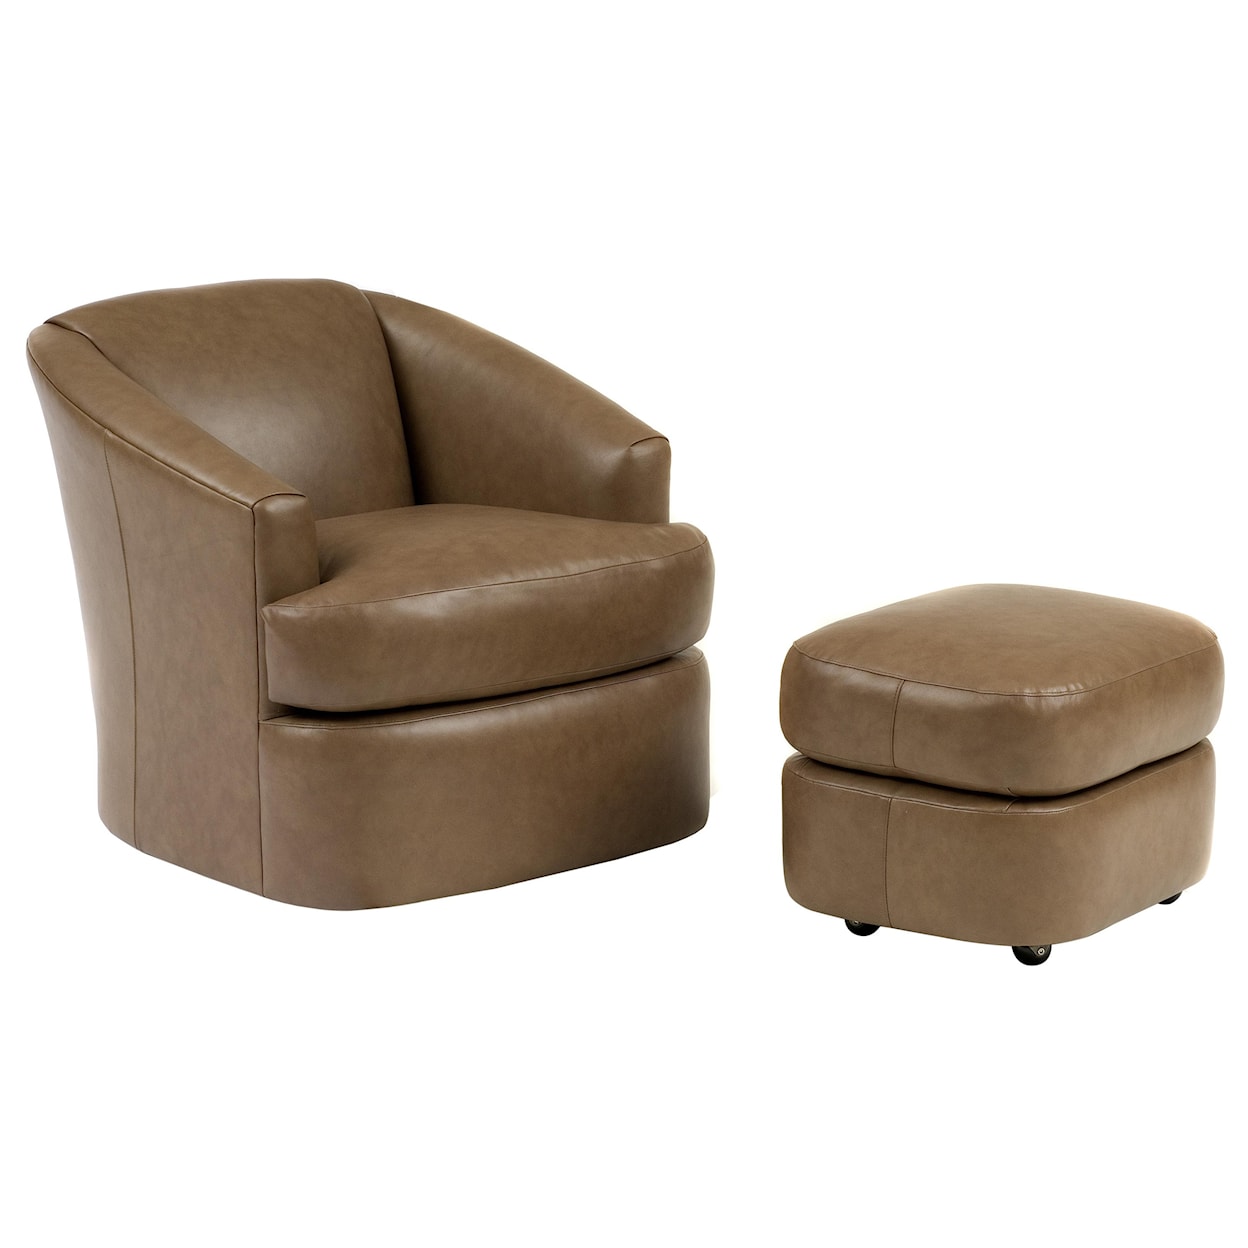 Smith Brothers Smith Brothers Contemporary Swivel Chair and Ottoman